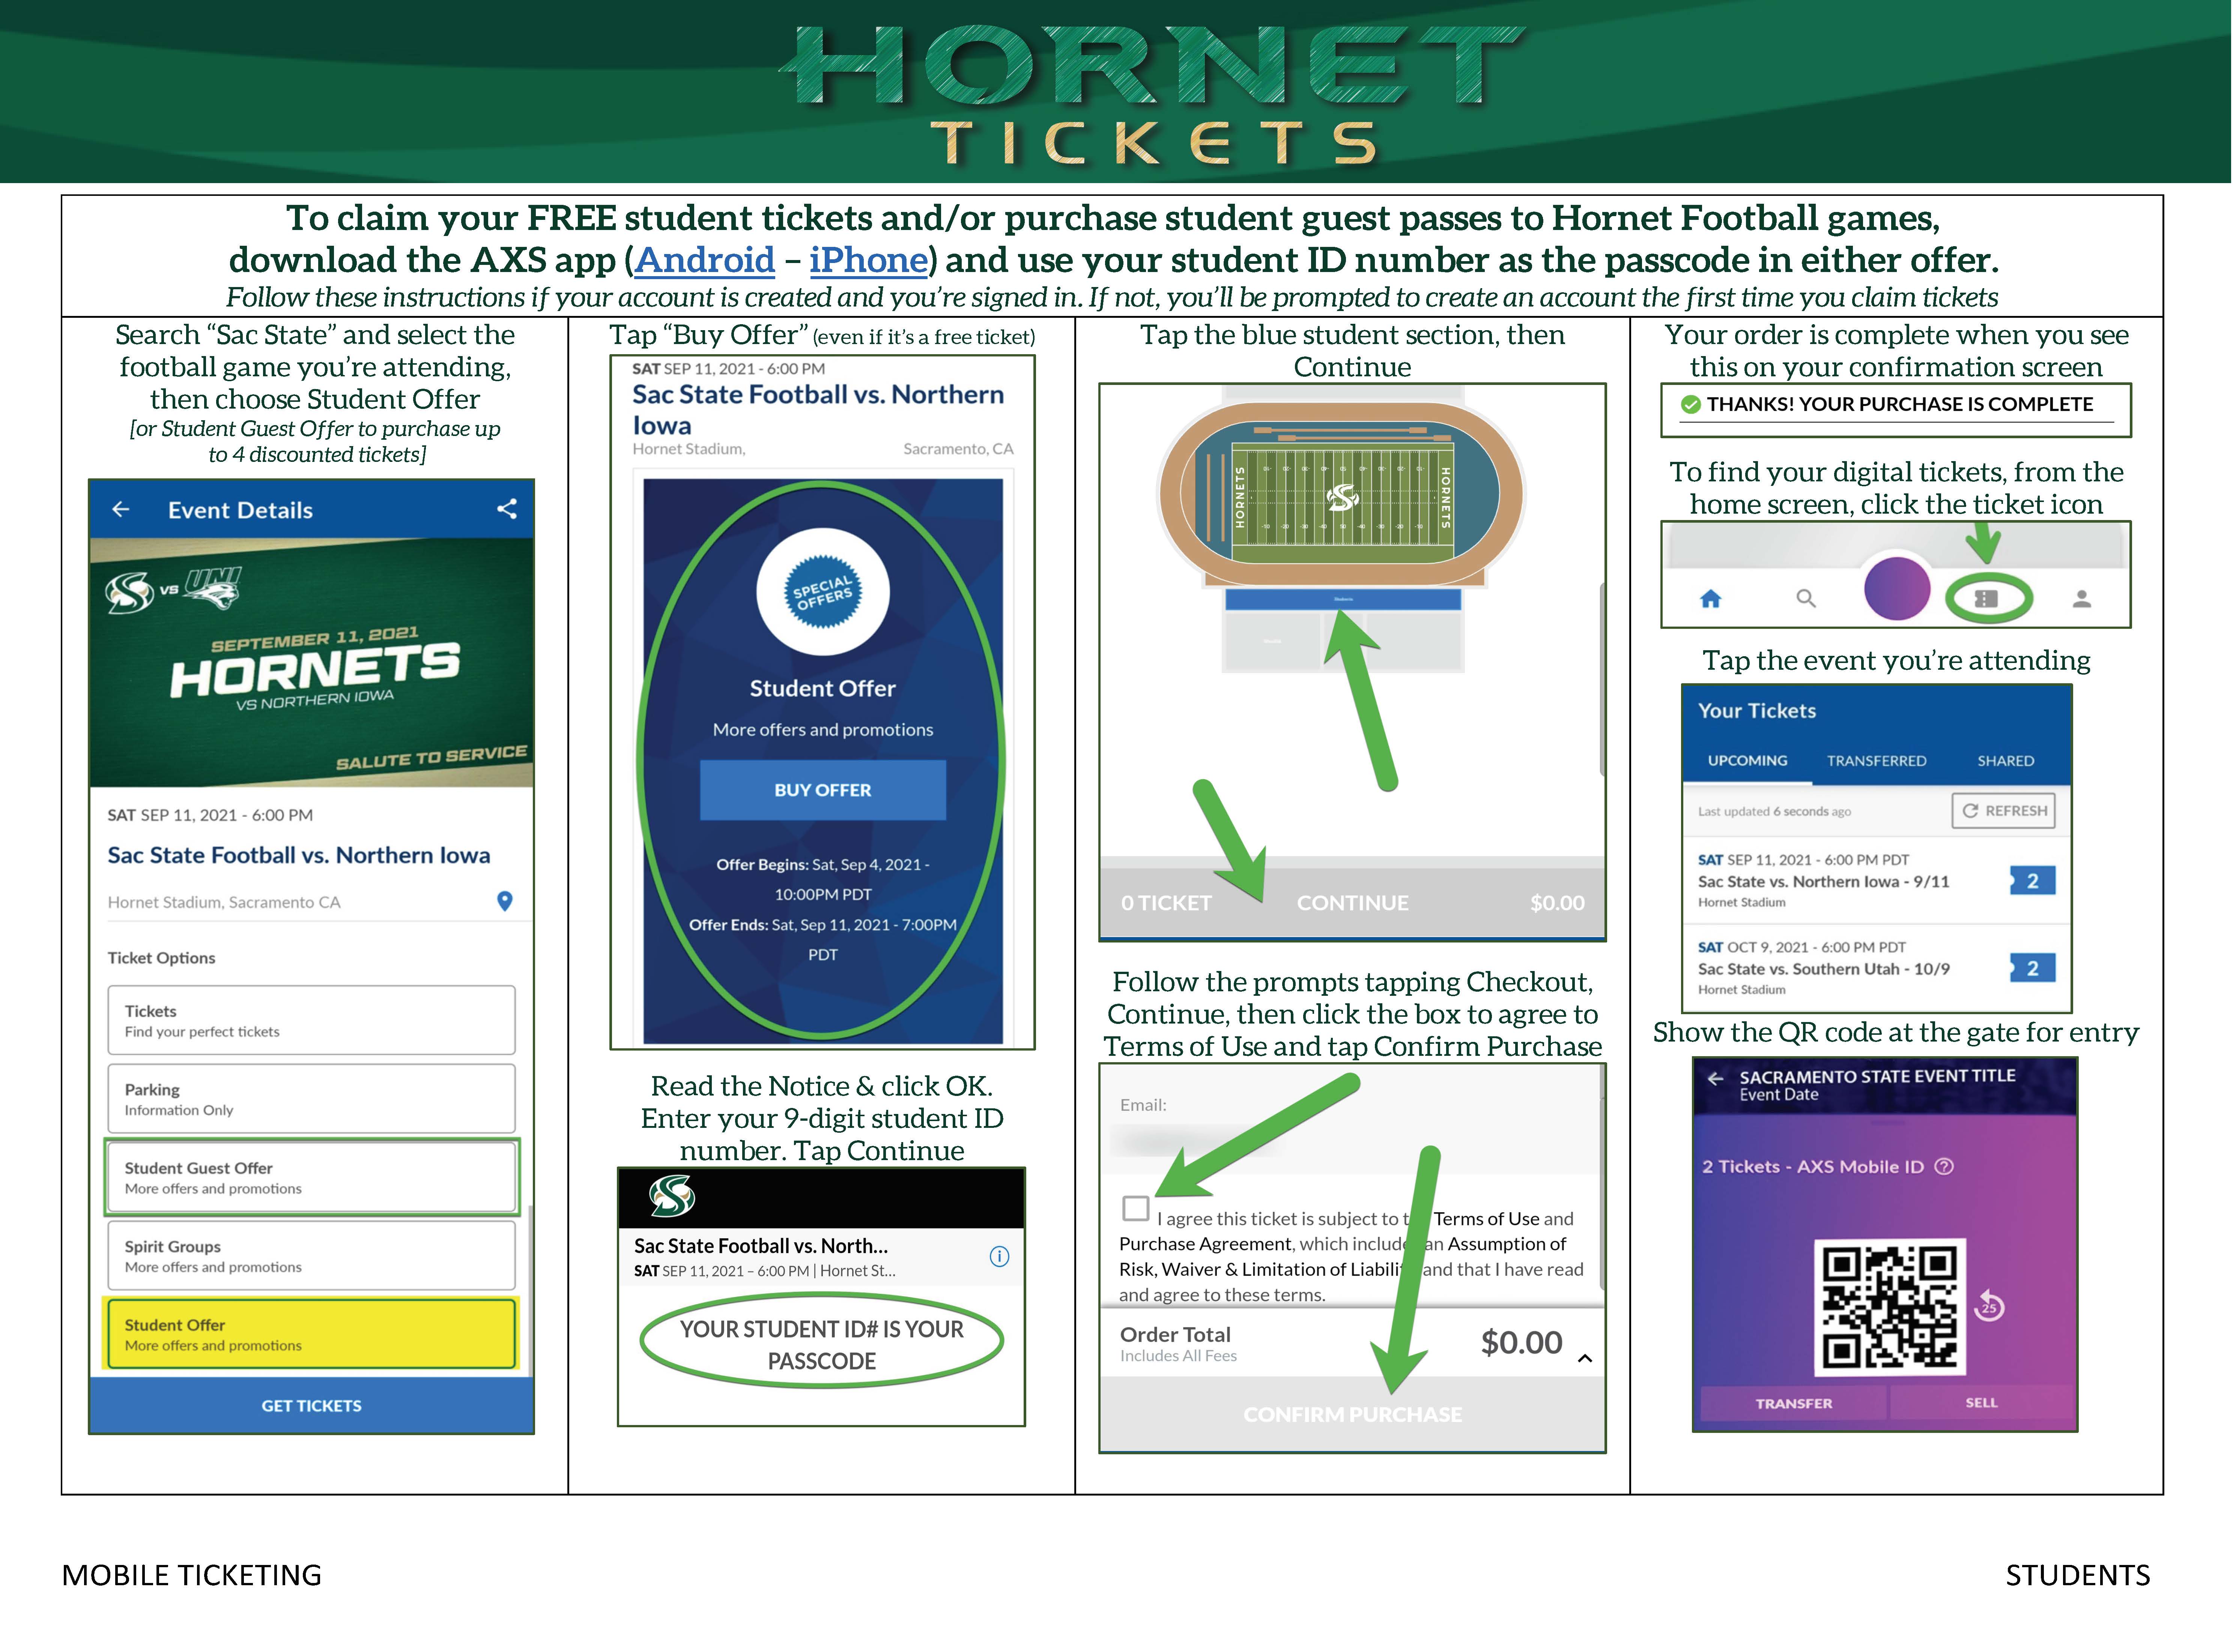 Image of tutorial on how to claim free student tickets to football games